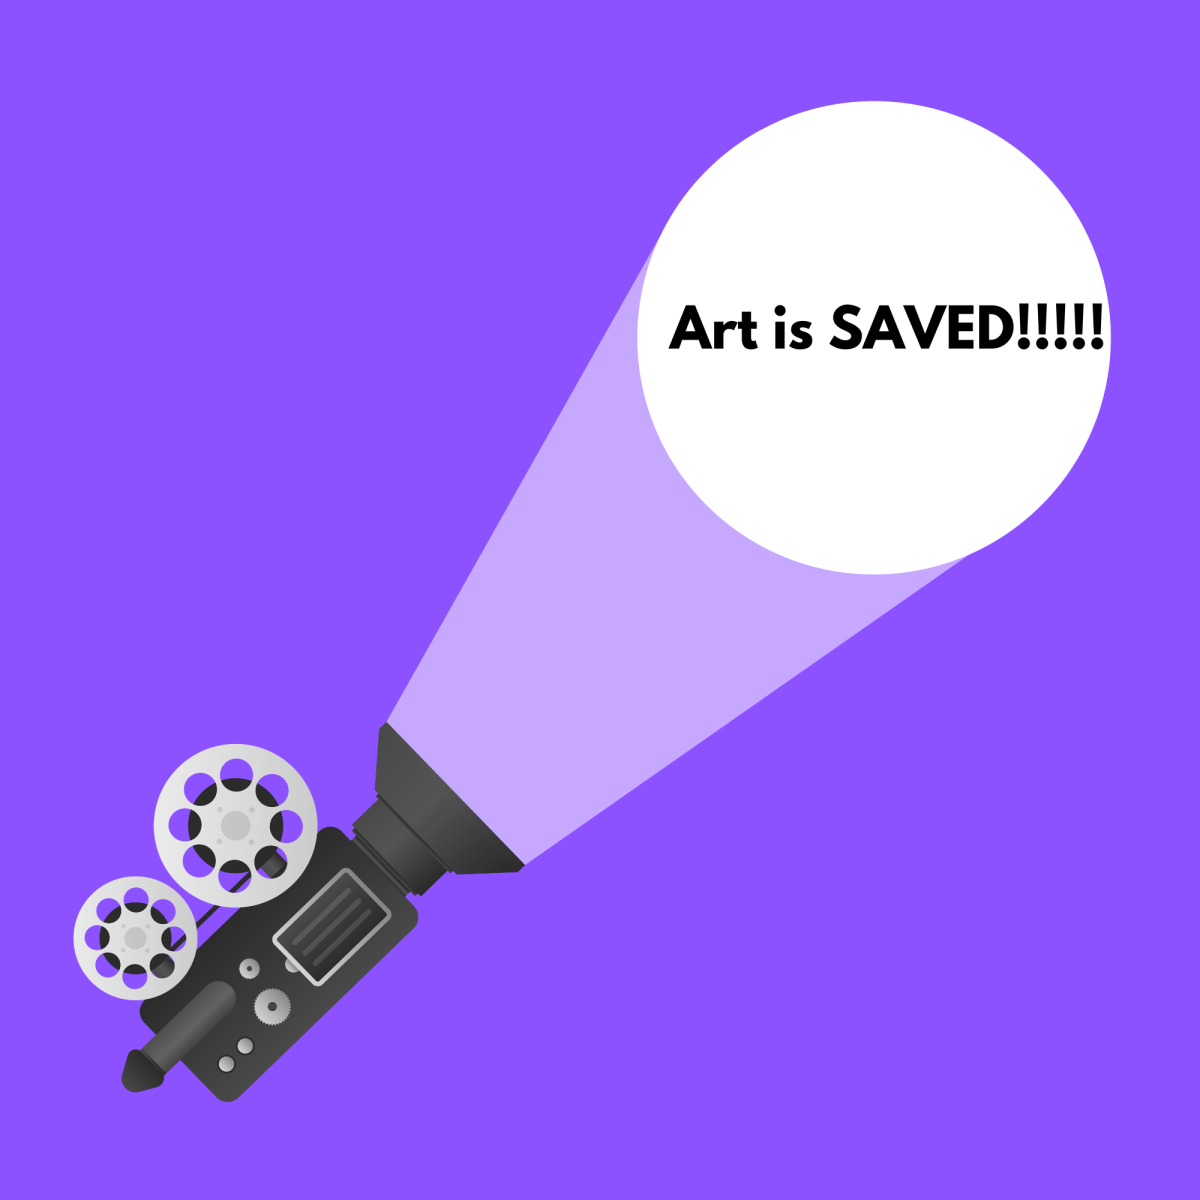 The film industry has been on a downward spiral for the last couple of decades. I think the current place the industry is at means that we are in for a resurgence in quality.

- Made in Canva